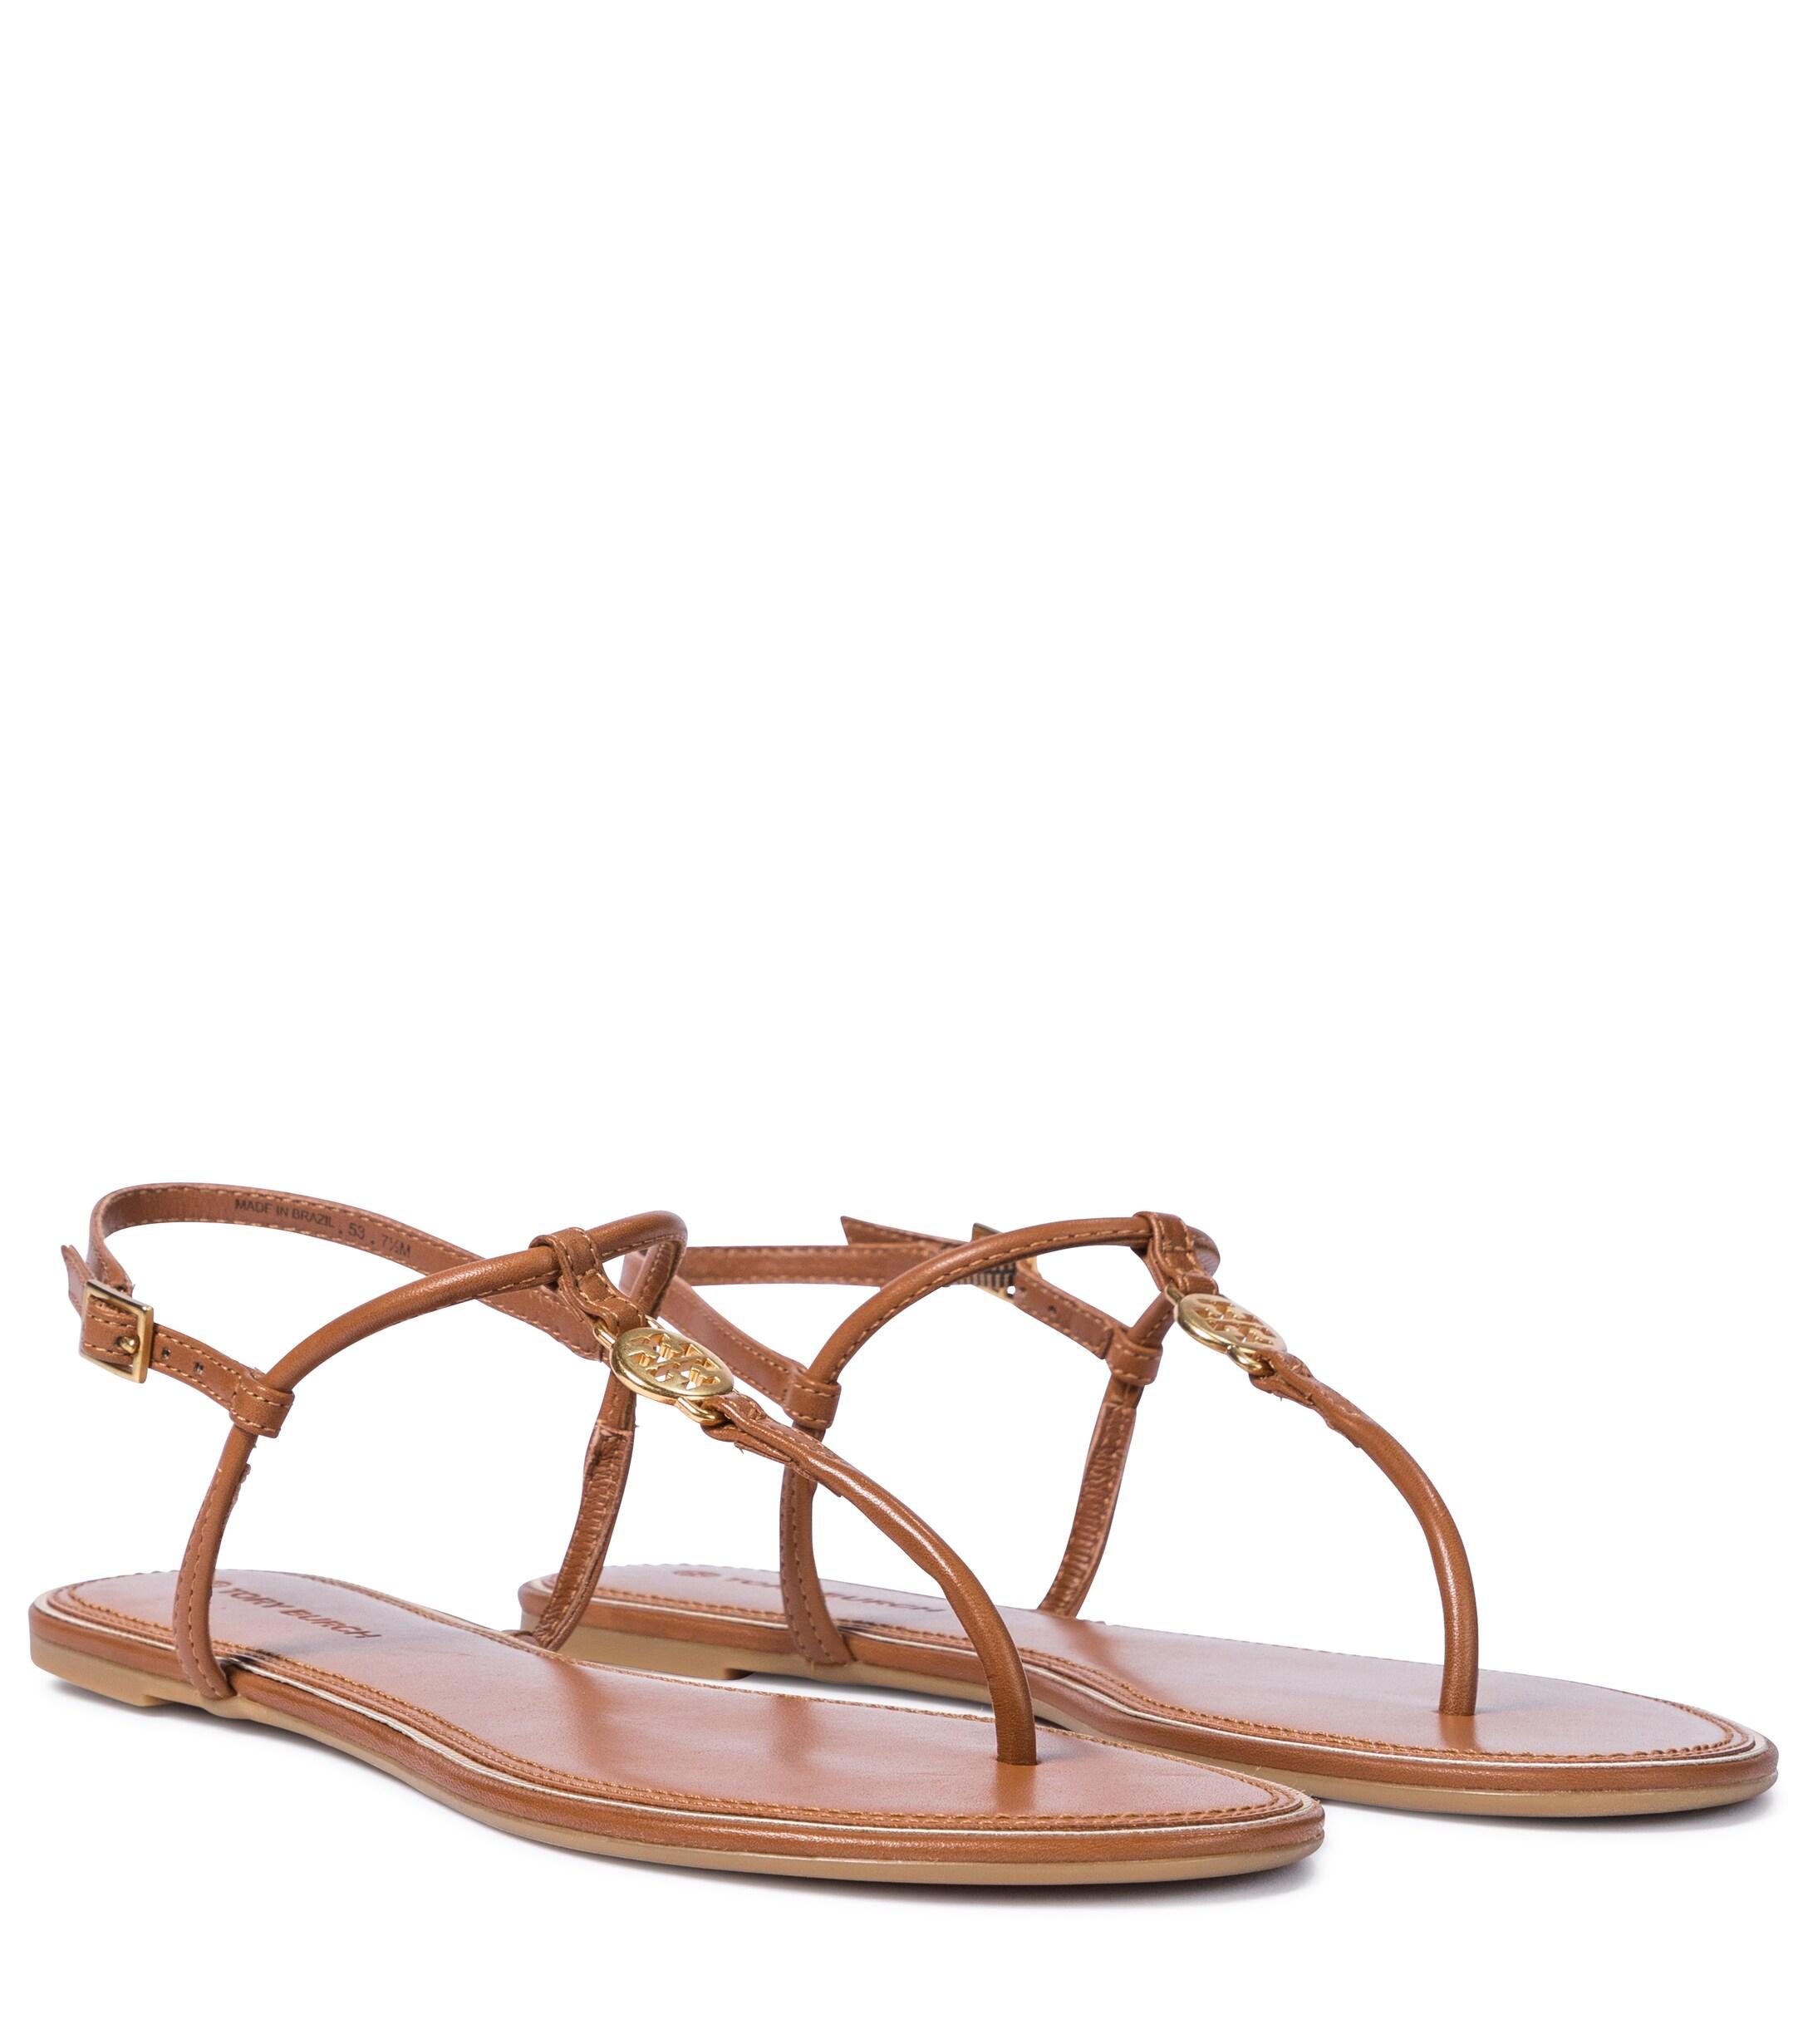 Tory Burch Emmy Leather Sandals in Brown - Lyst